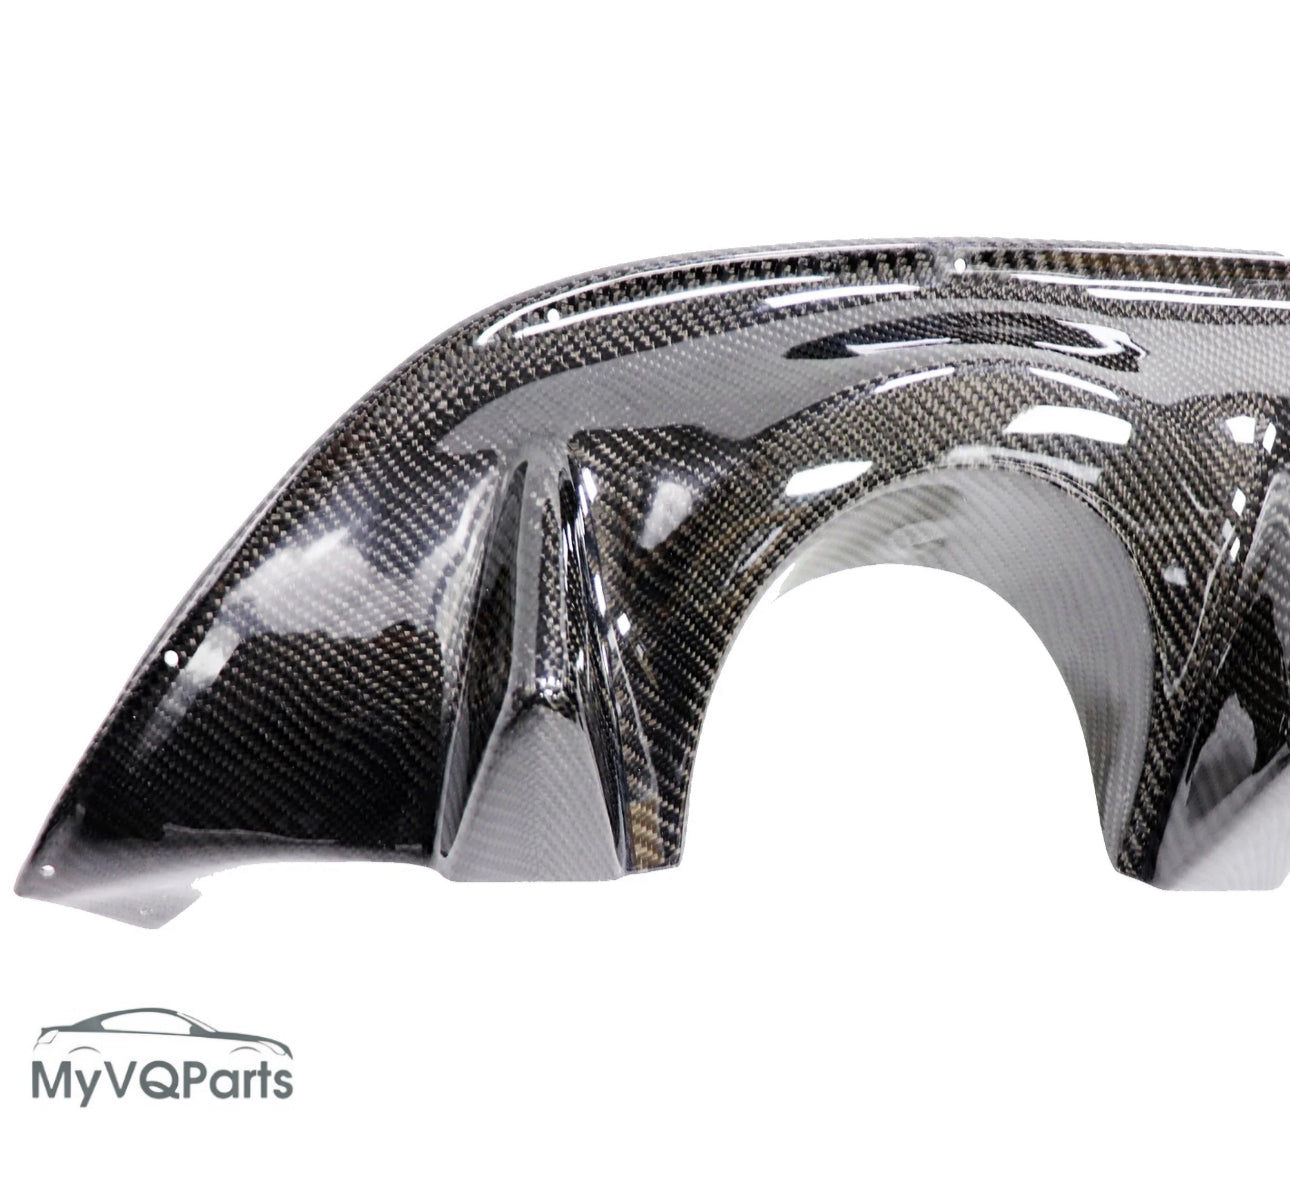 MyVQParts G37 Coupe V2 style rear diffuser